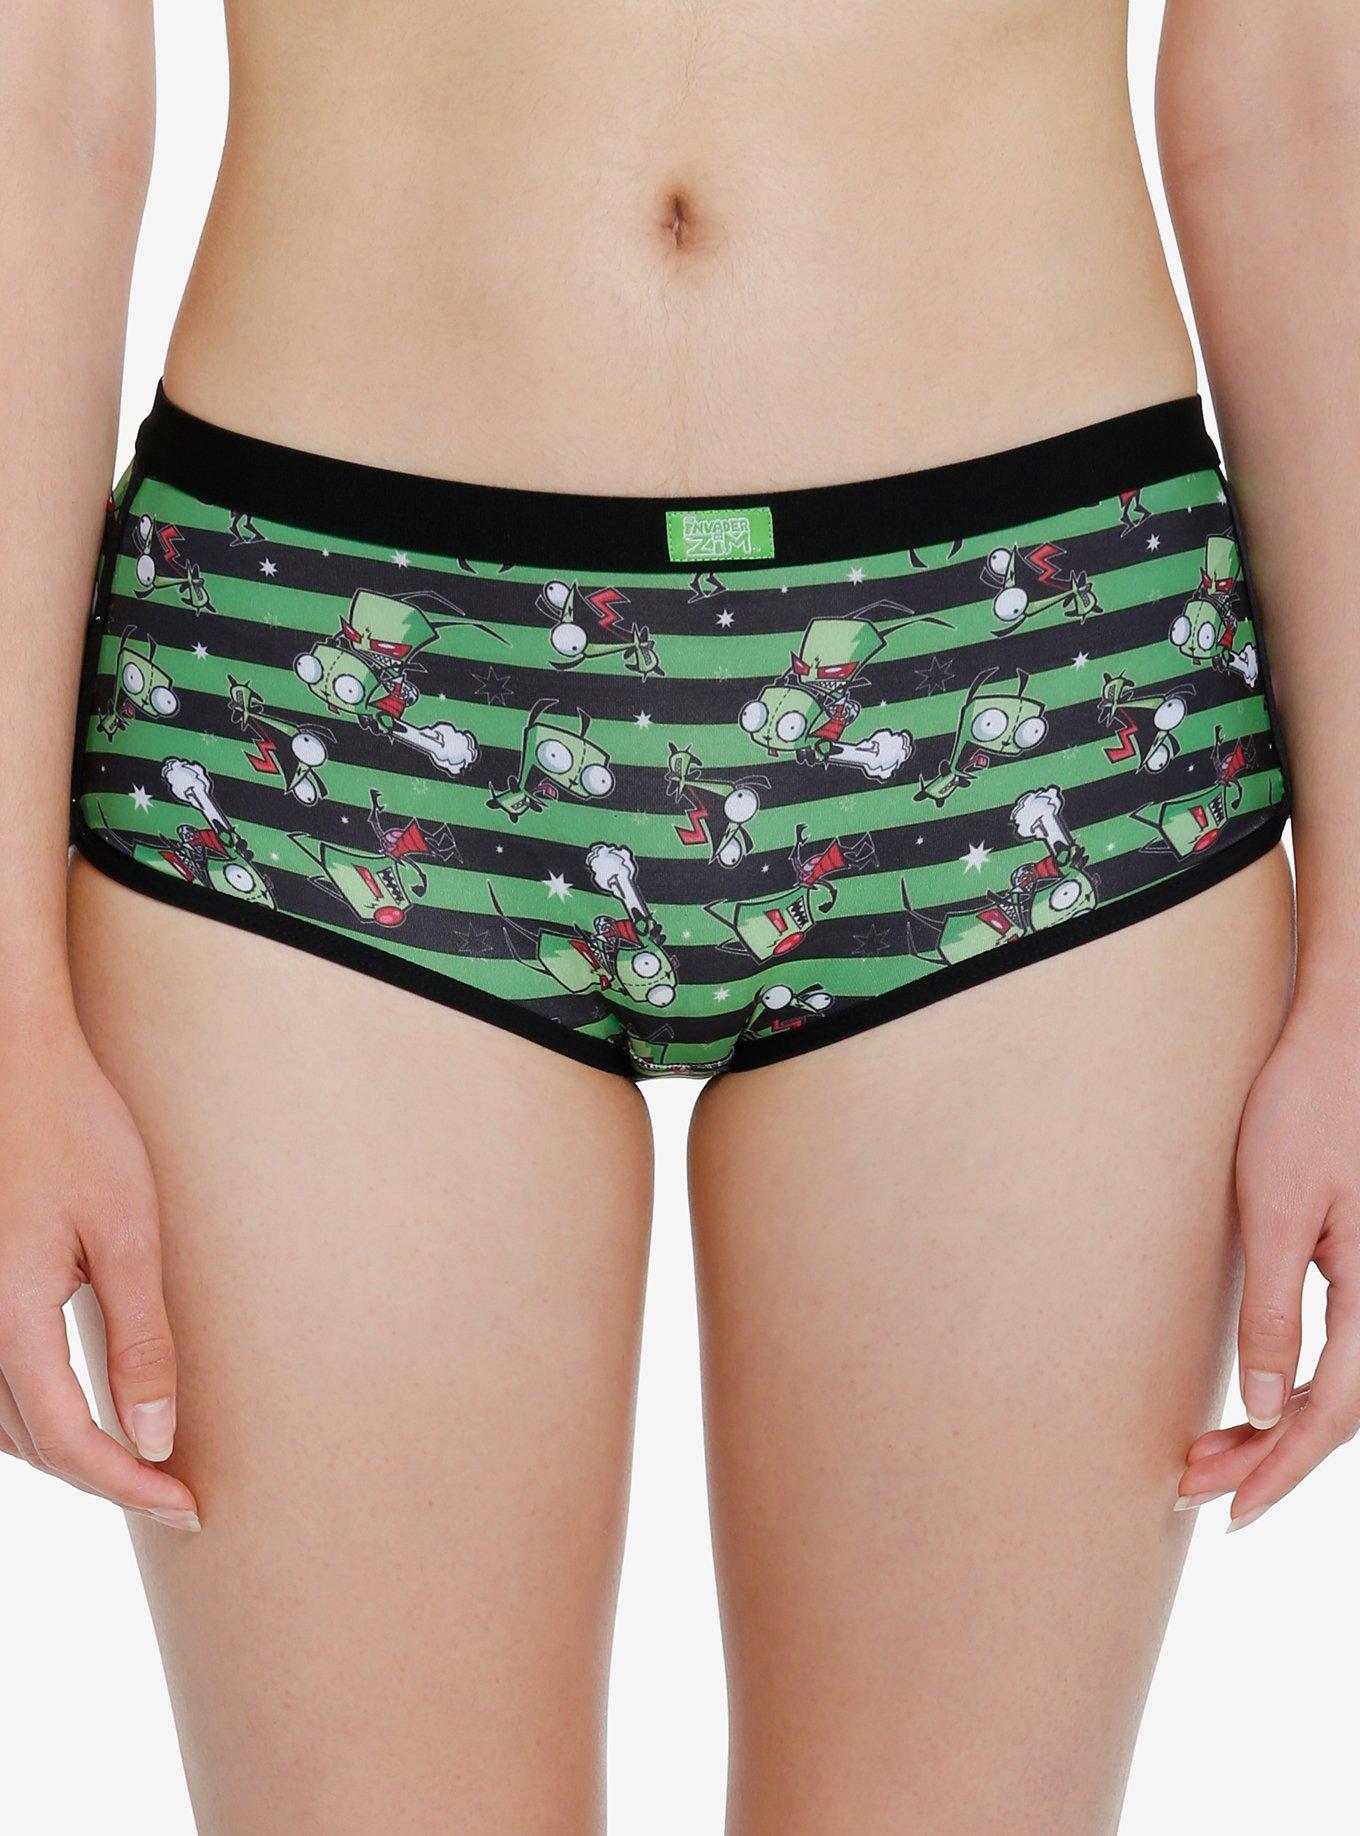 Find more 9 Pair Of Cat & Jack Girls Underwear for sale at up to 90% off